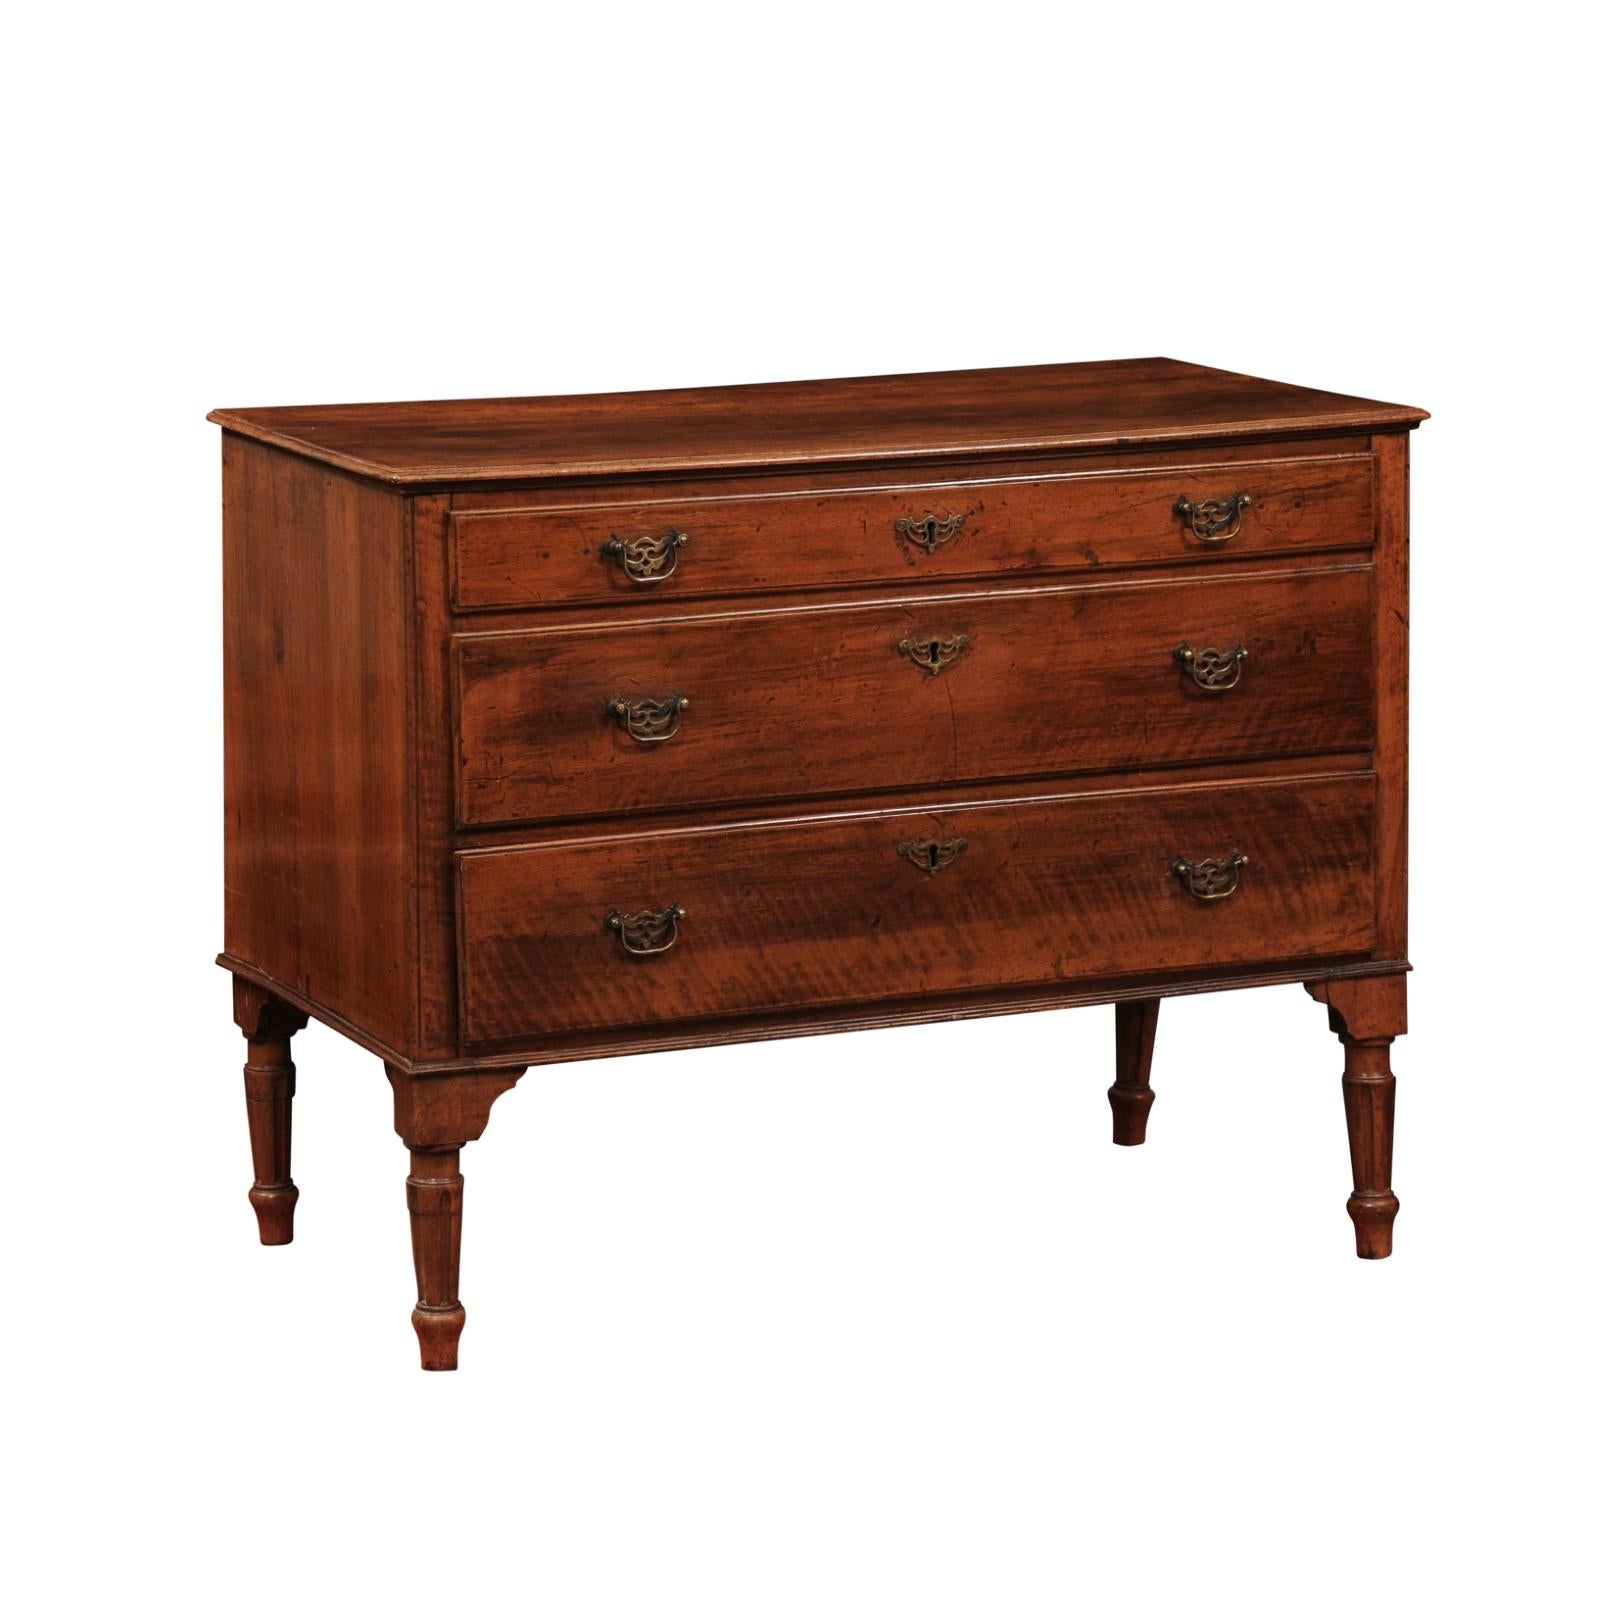 French Louis XVI Walnut Commode with 3 Drawers and Fluted Legs, Late 18th Century